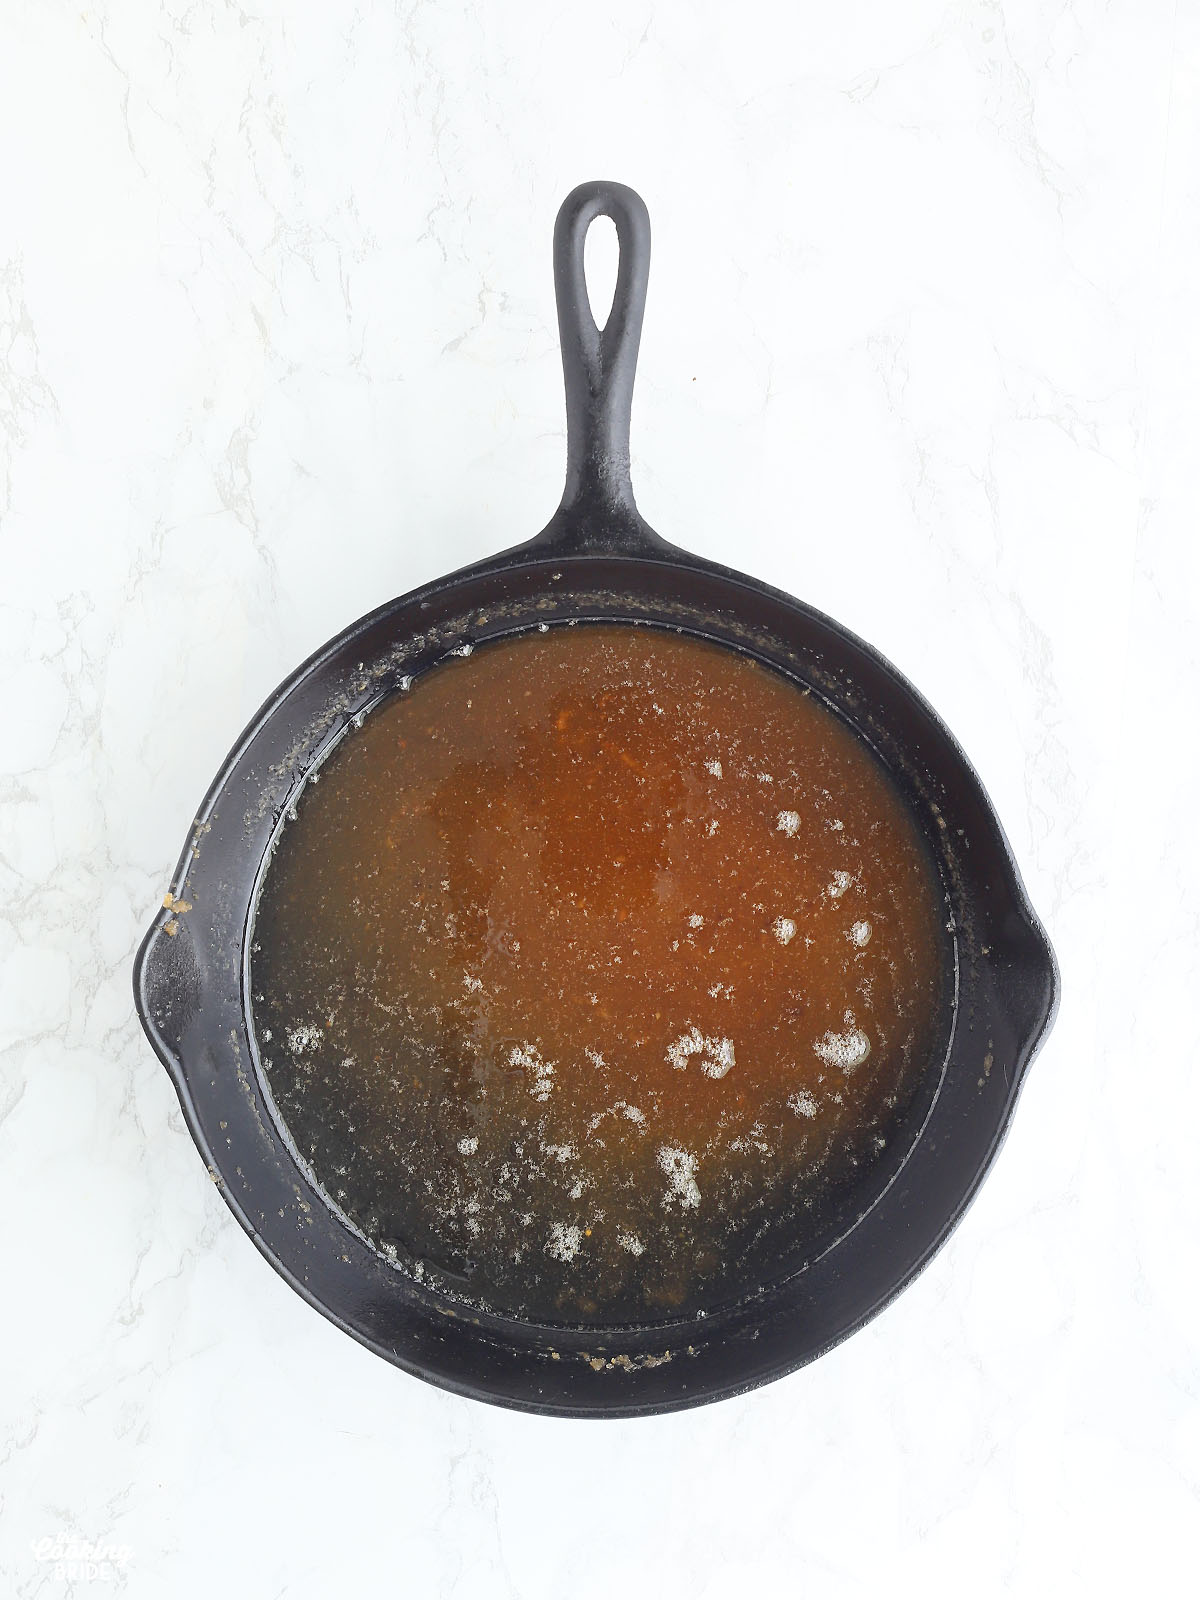 melted butter and brown sugar in a cast iron skillet